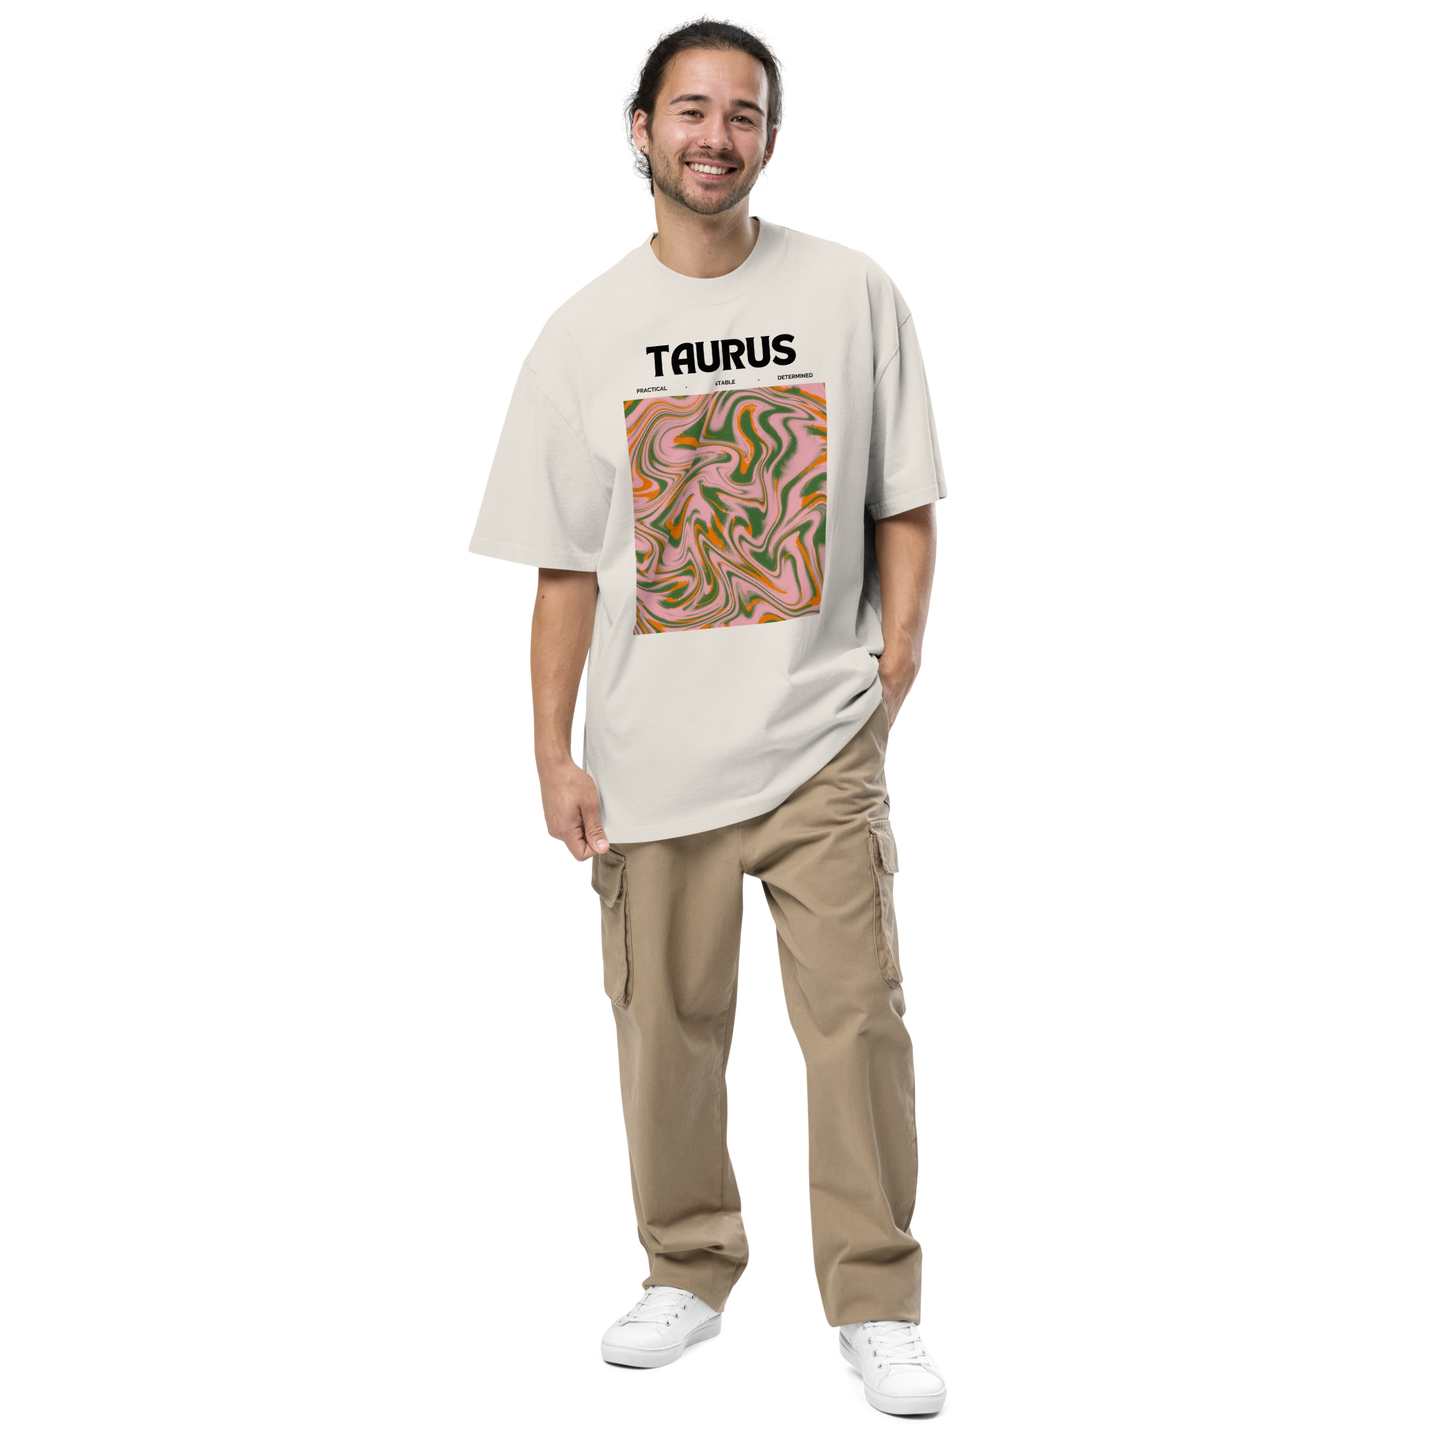 Man wearing a Faded Bone Taurus Oversized T-Shirt featuring an Abstract Taurus Star Sign graphic on the chest - Cool Graphic Zodiac Oversized Tees - Boozy Fox